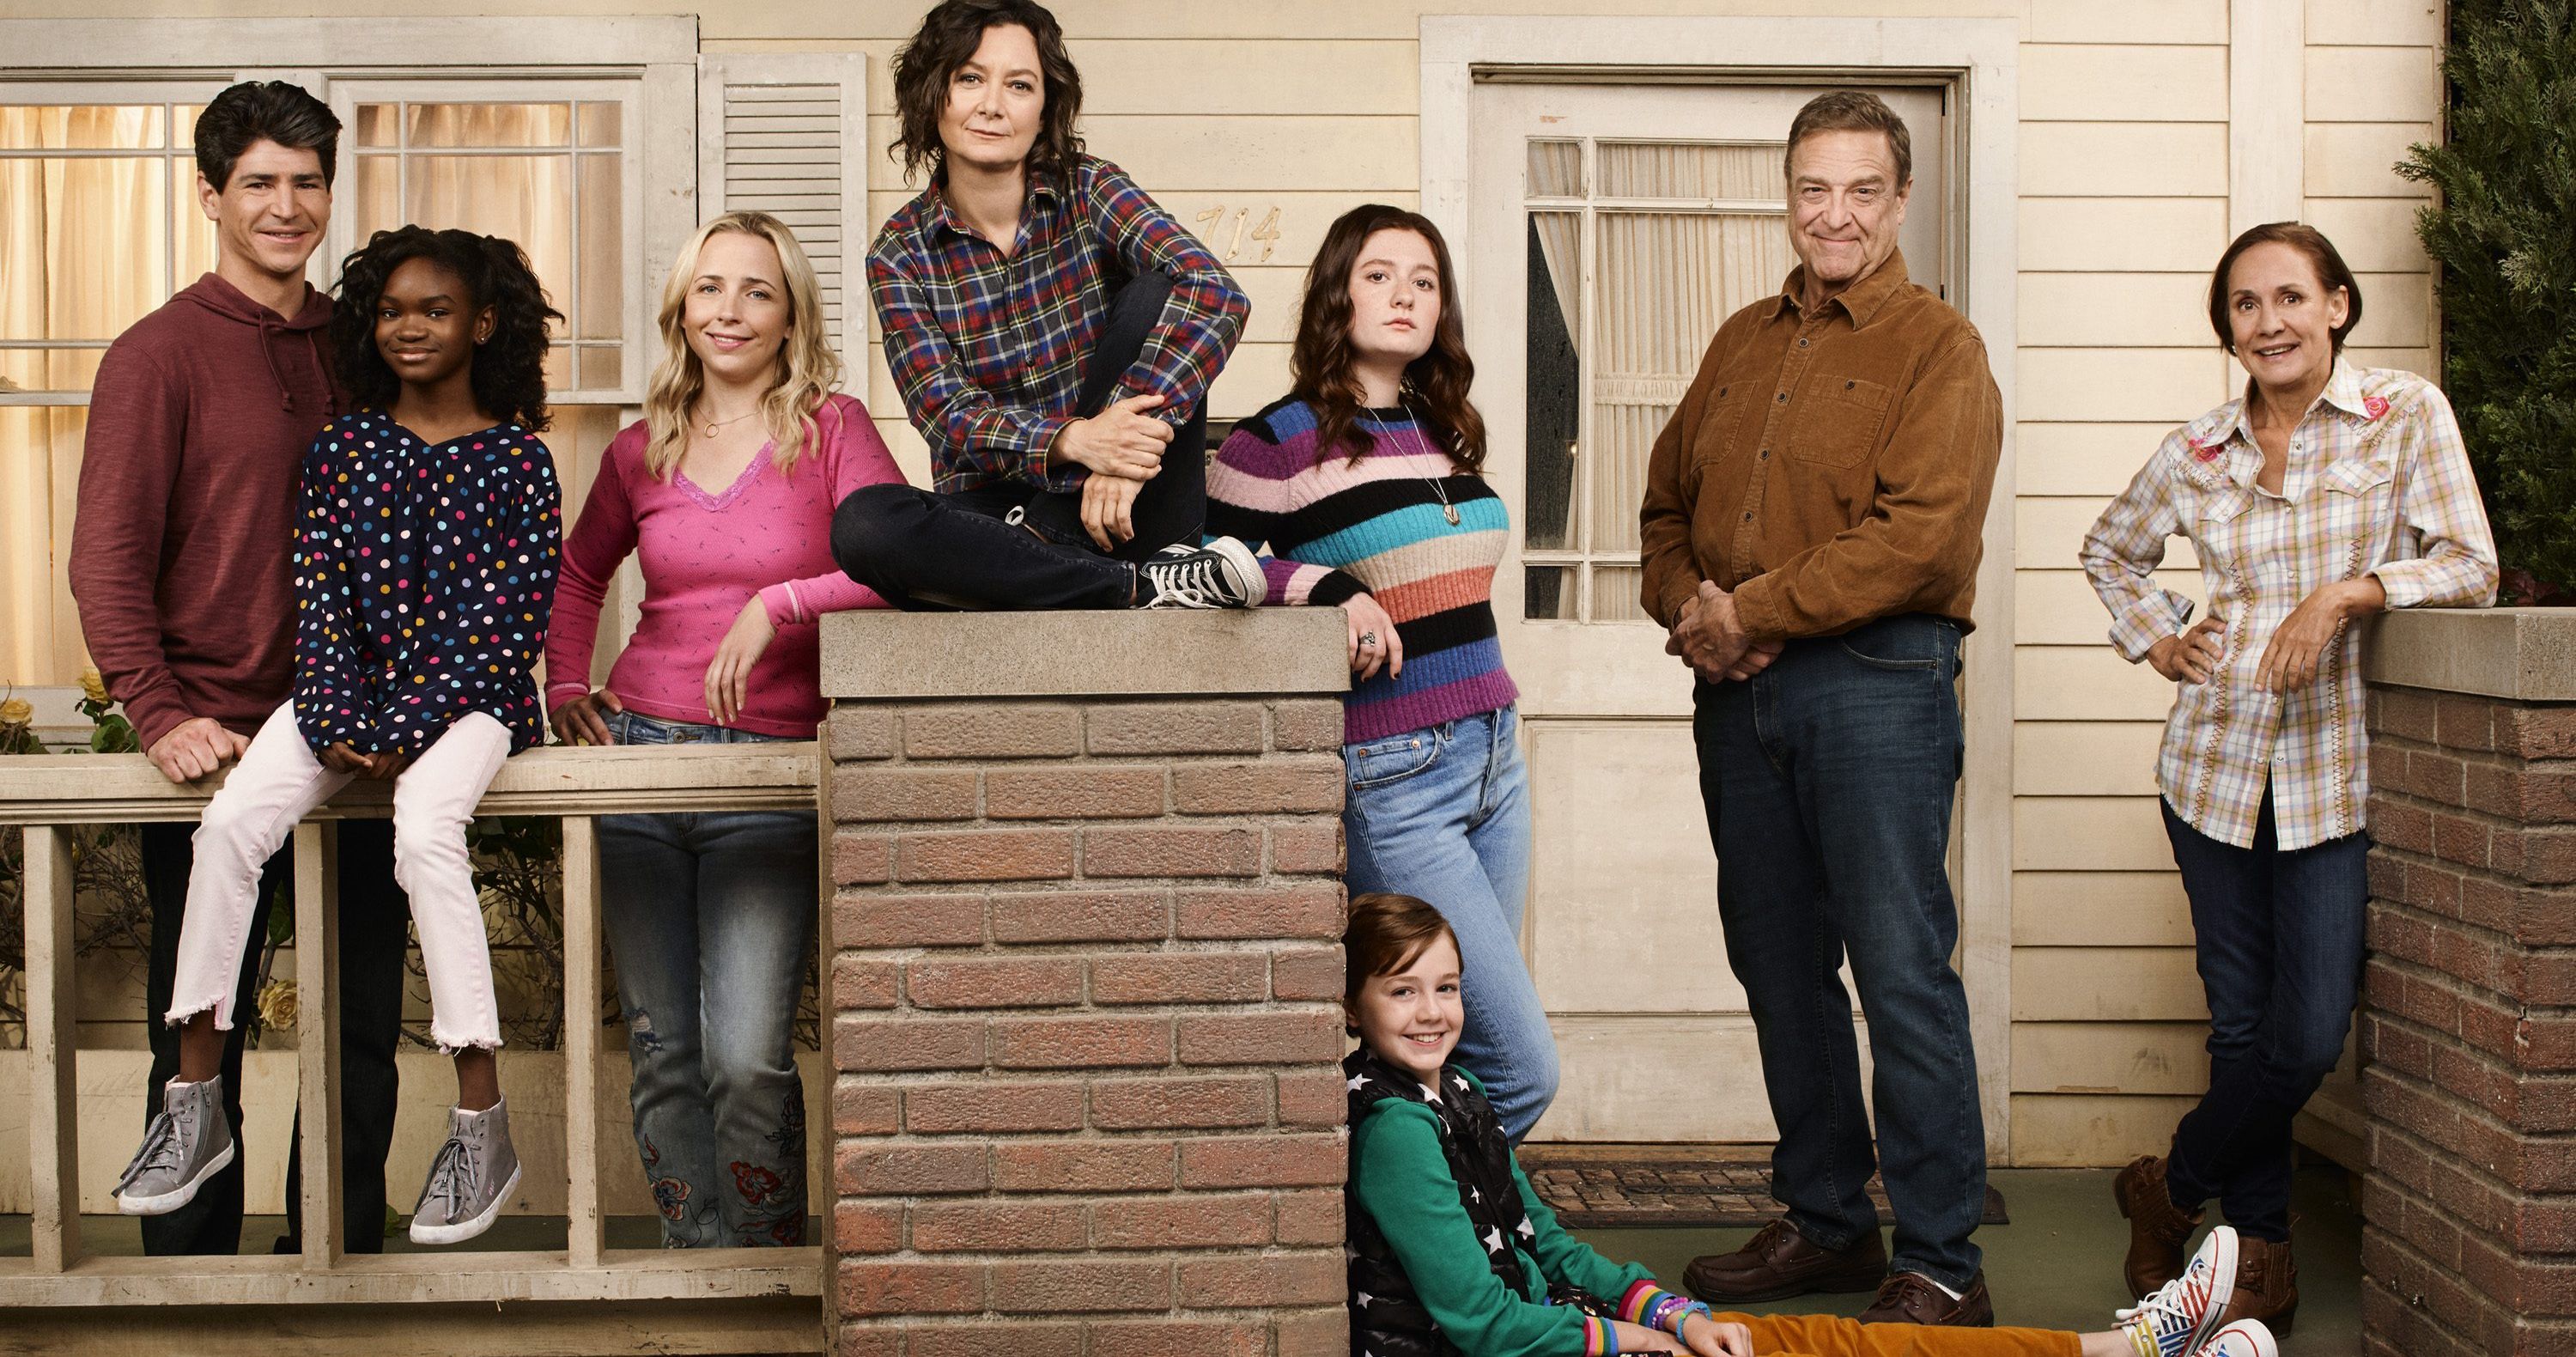 The Conners Season 3 Renewal Is Imminent as Cast Closes New Deal